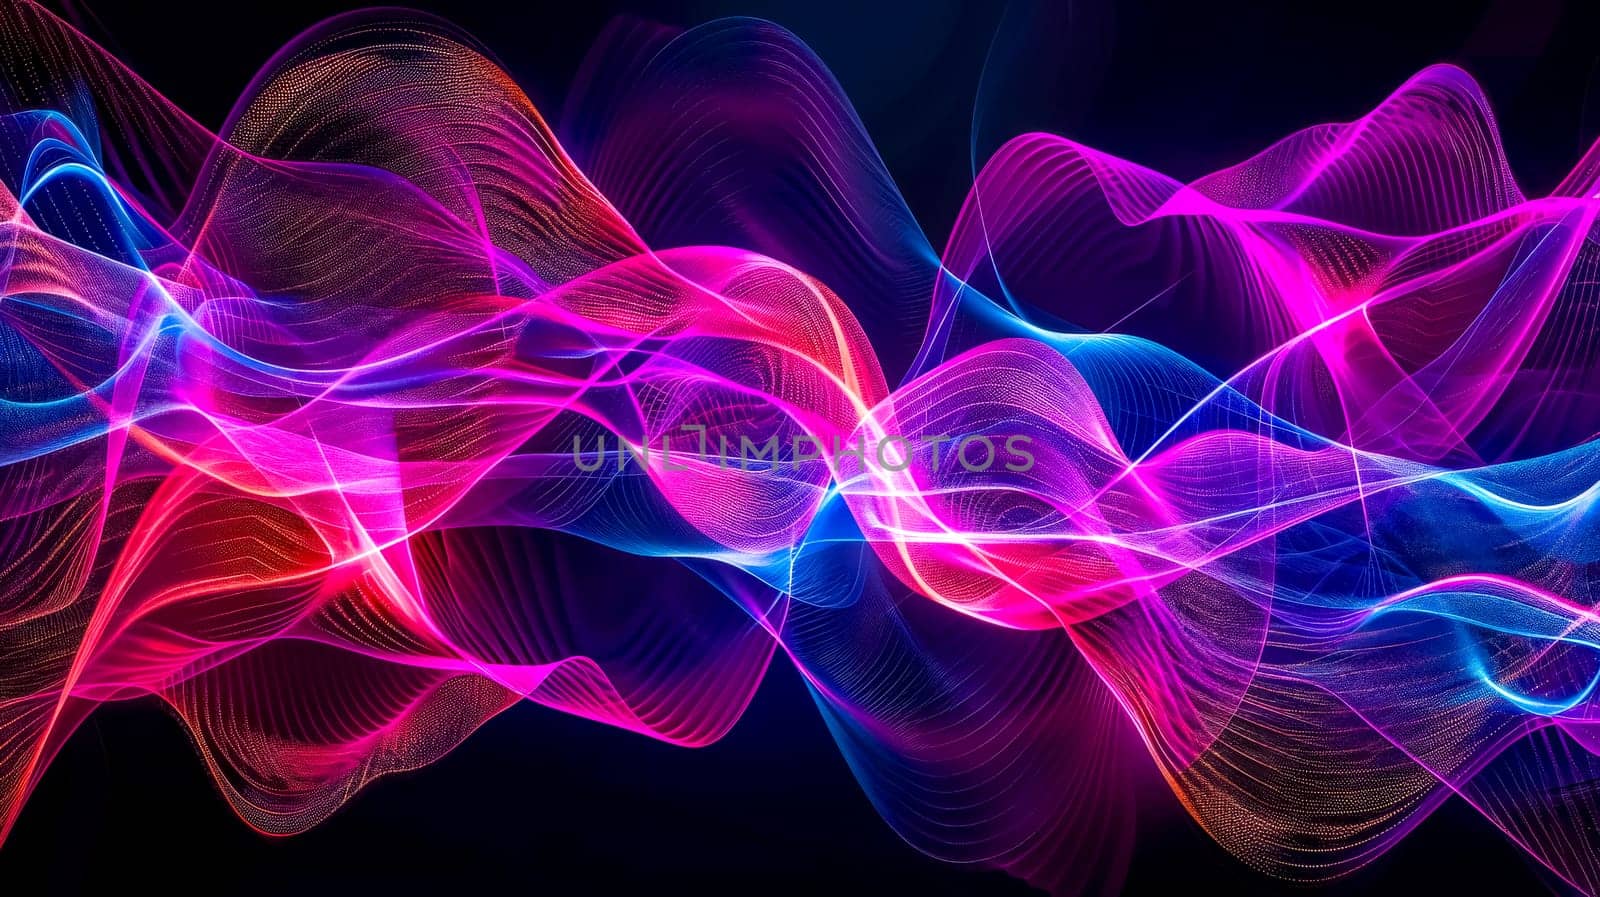 Abstract colorful waveforms on dark background by Edophoto